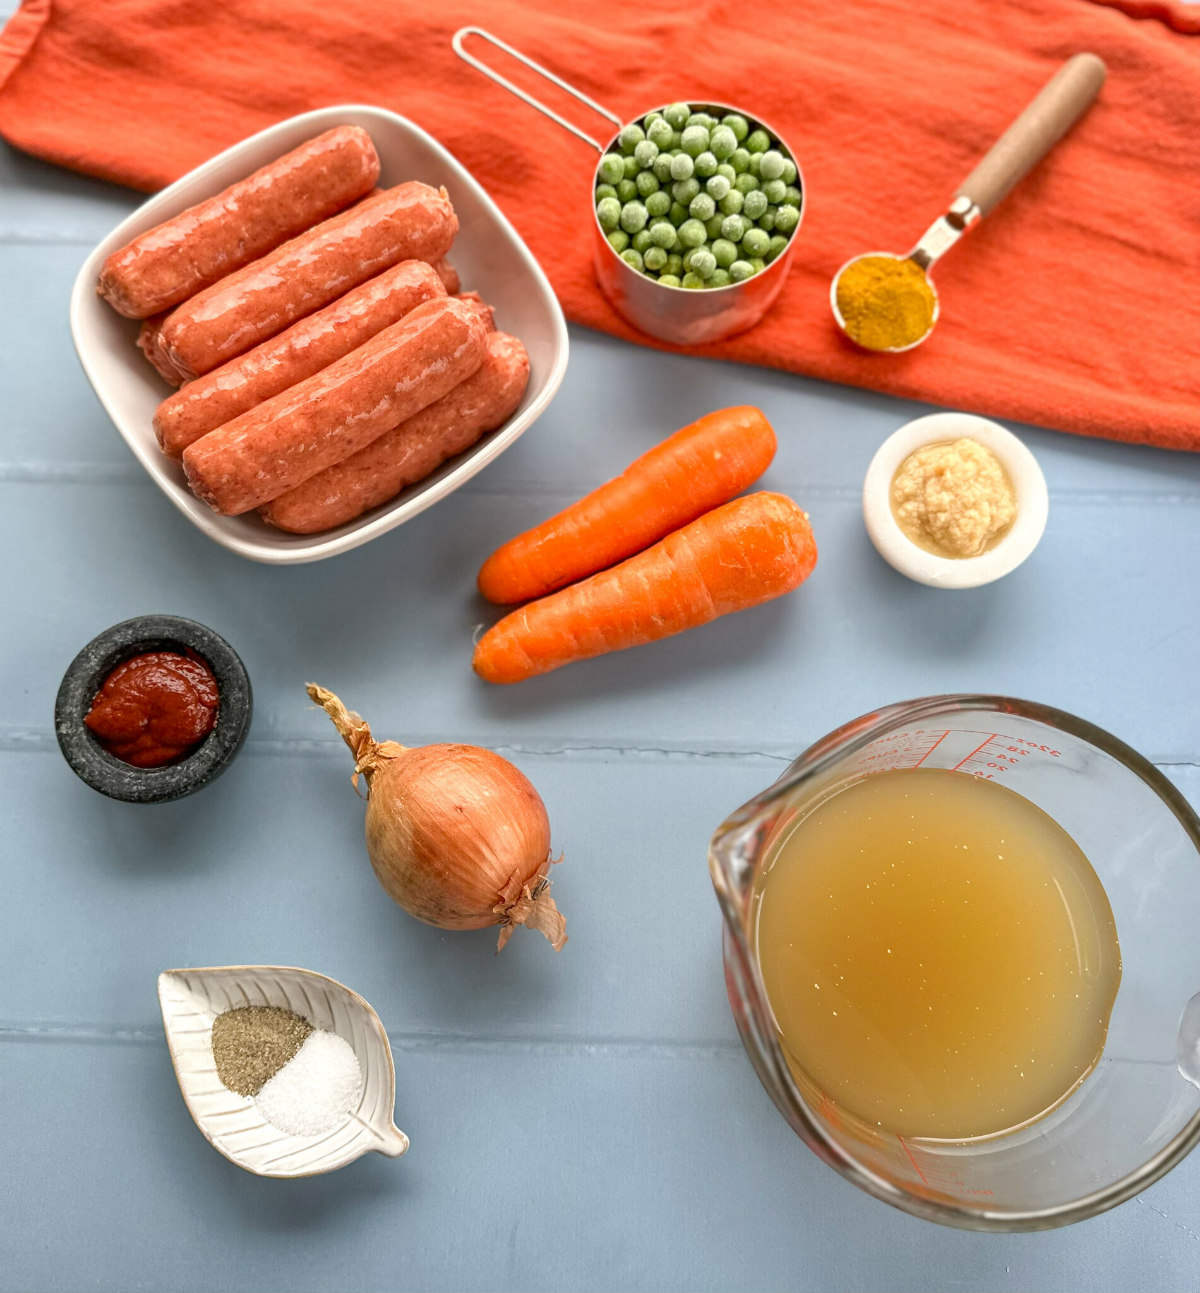 Ingredients used to make curried sausages see list in recipe card